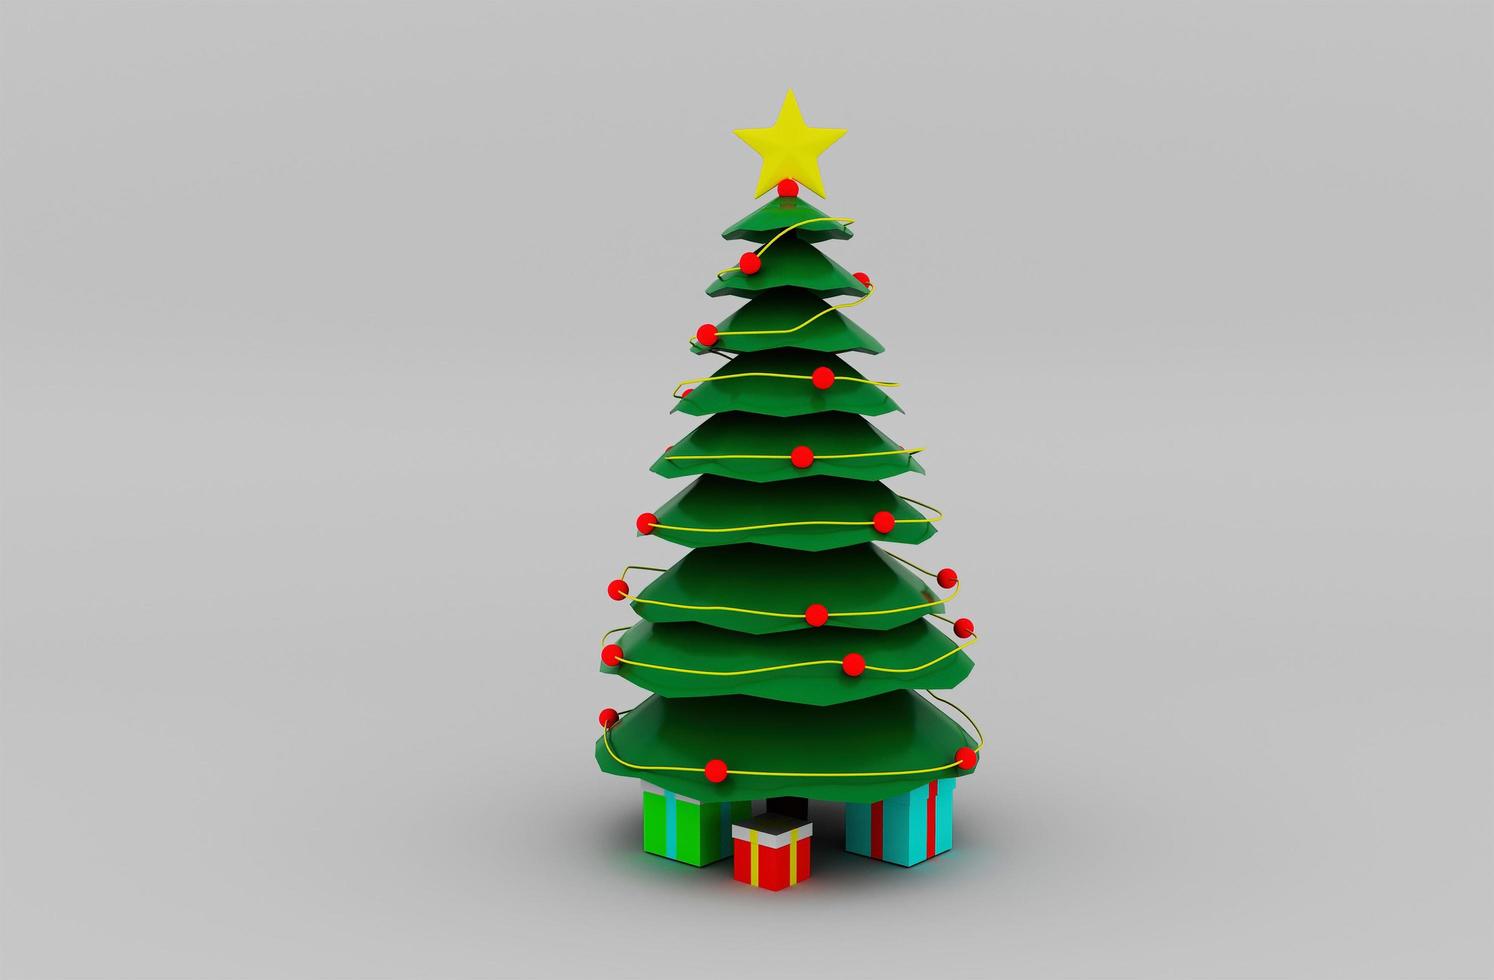 Christmas ornament tree with gift box 3d illustration on white background photo